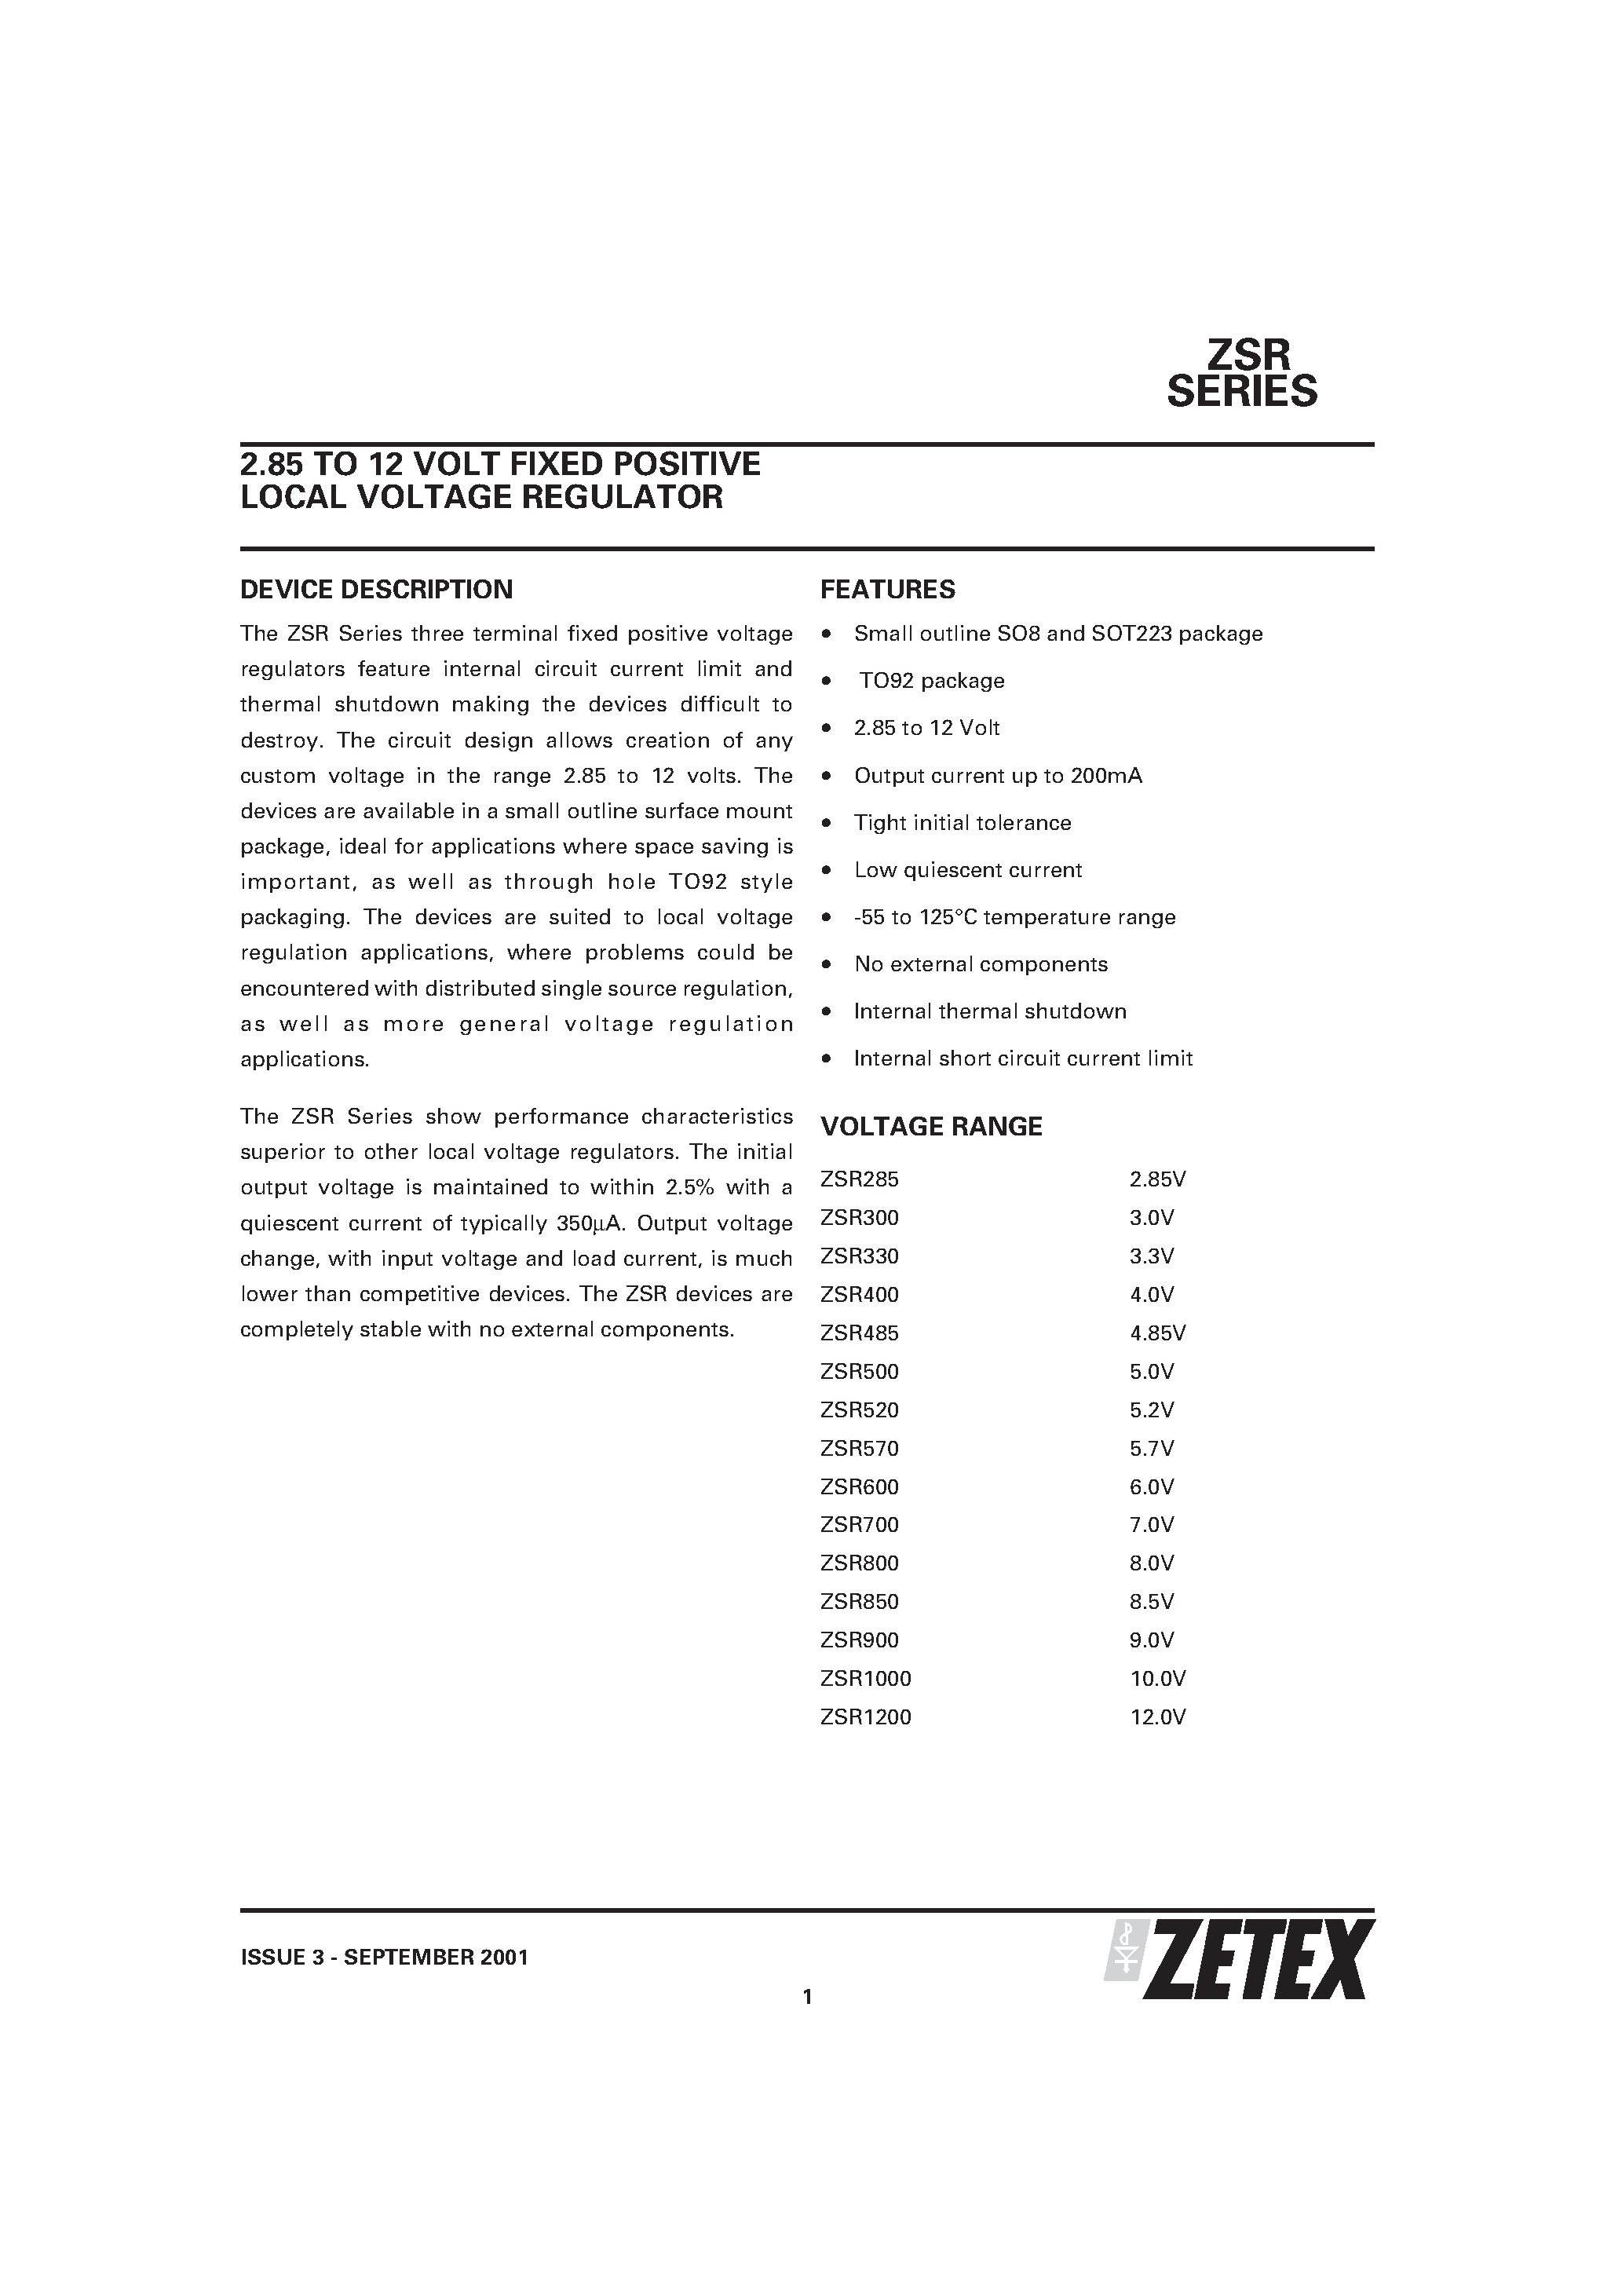 Datasheet ZSR1000G - 2.85 TO 12 VOLT FIXED POSITIVE LOCAL VOLTAGE REGULATOR page 1